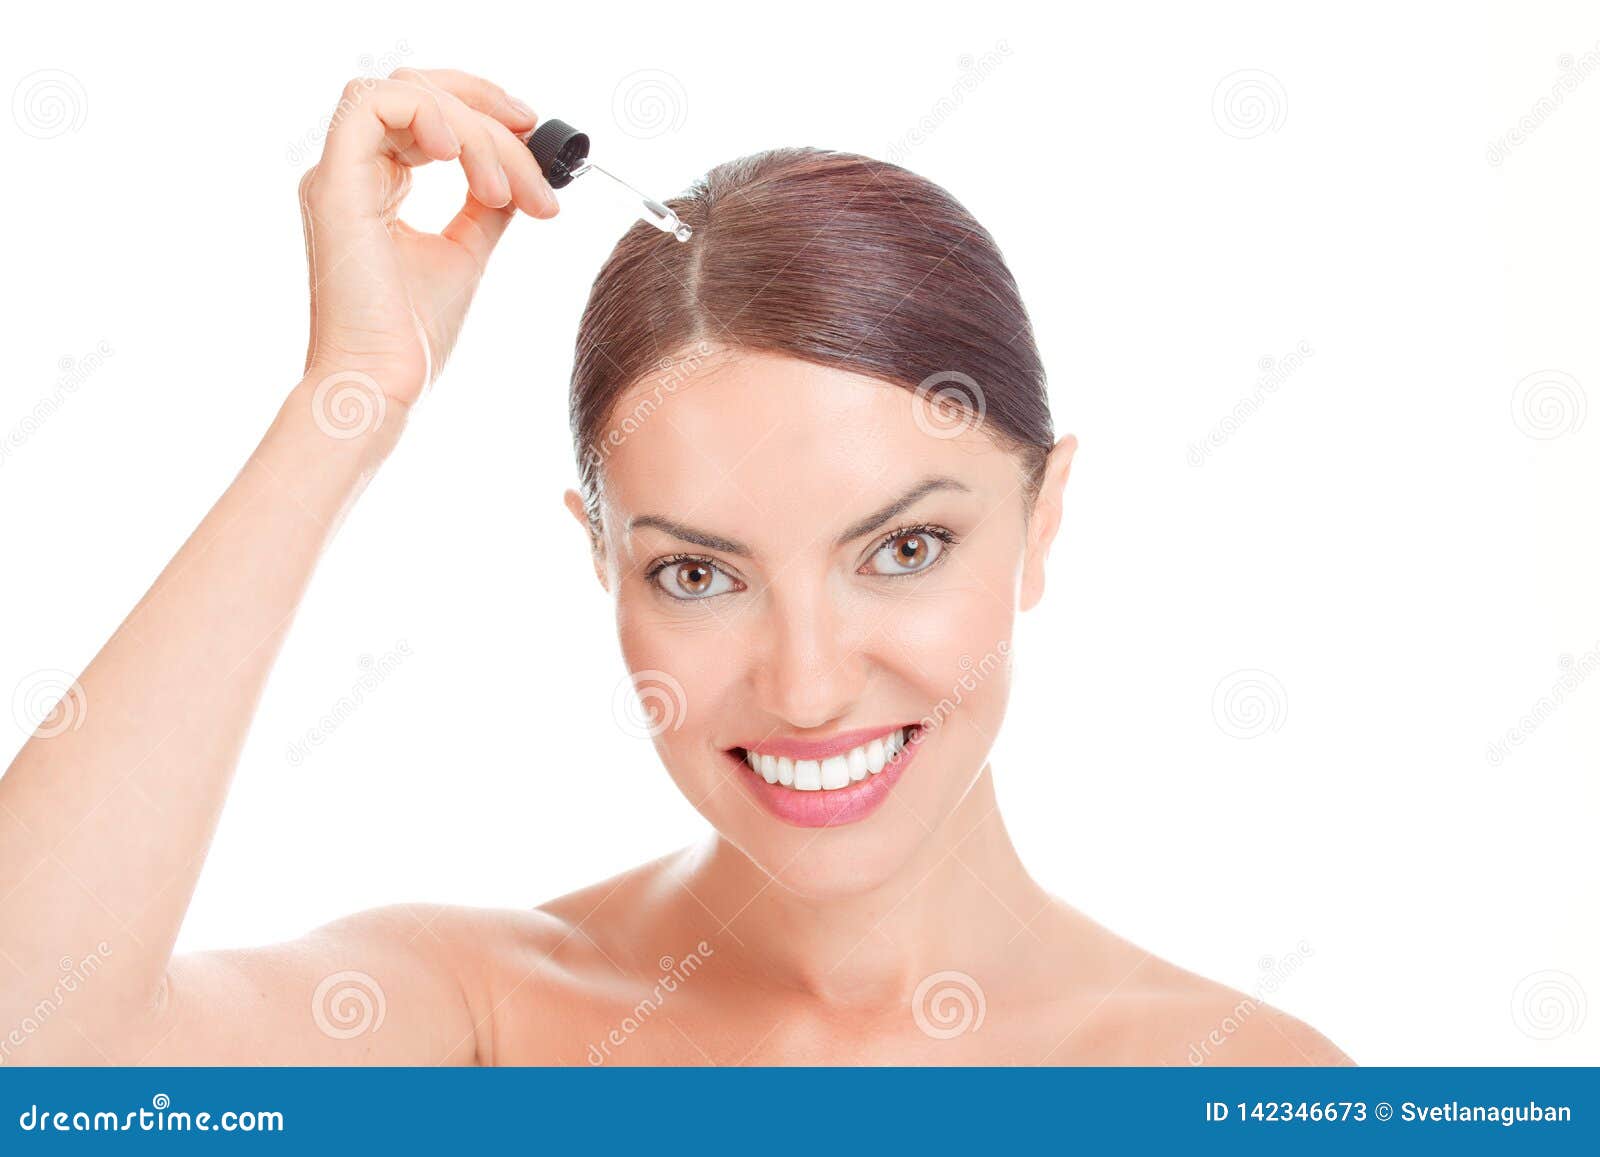 woman aplying serum essence, essential oils to her hairline